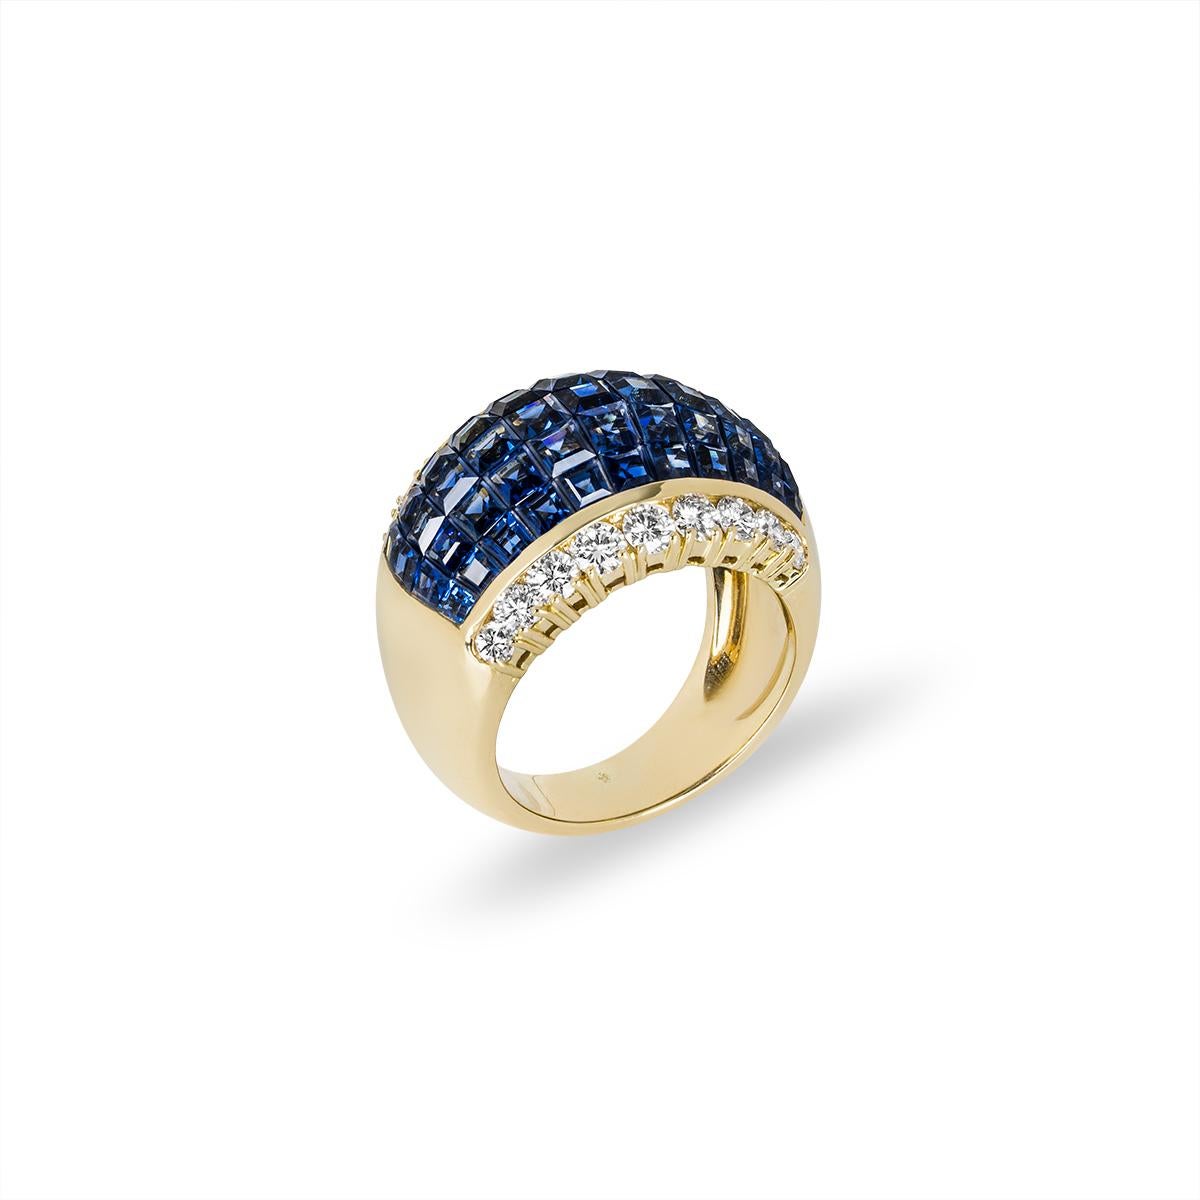 A unique 18k yellow gold sapphire and diamond dress ring. The bombe ring has a domed design set to the centre with 5 rows of invisibly set square-cut sapphires. The 55 sapphires have an approximate total weight of 5.00ct and display a rich blue hue.